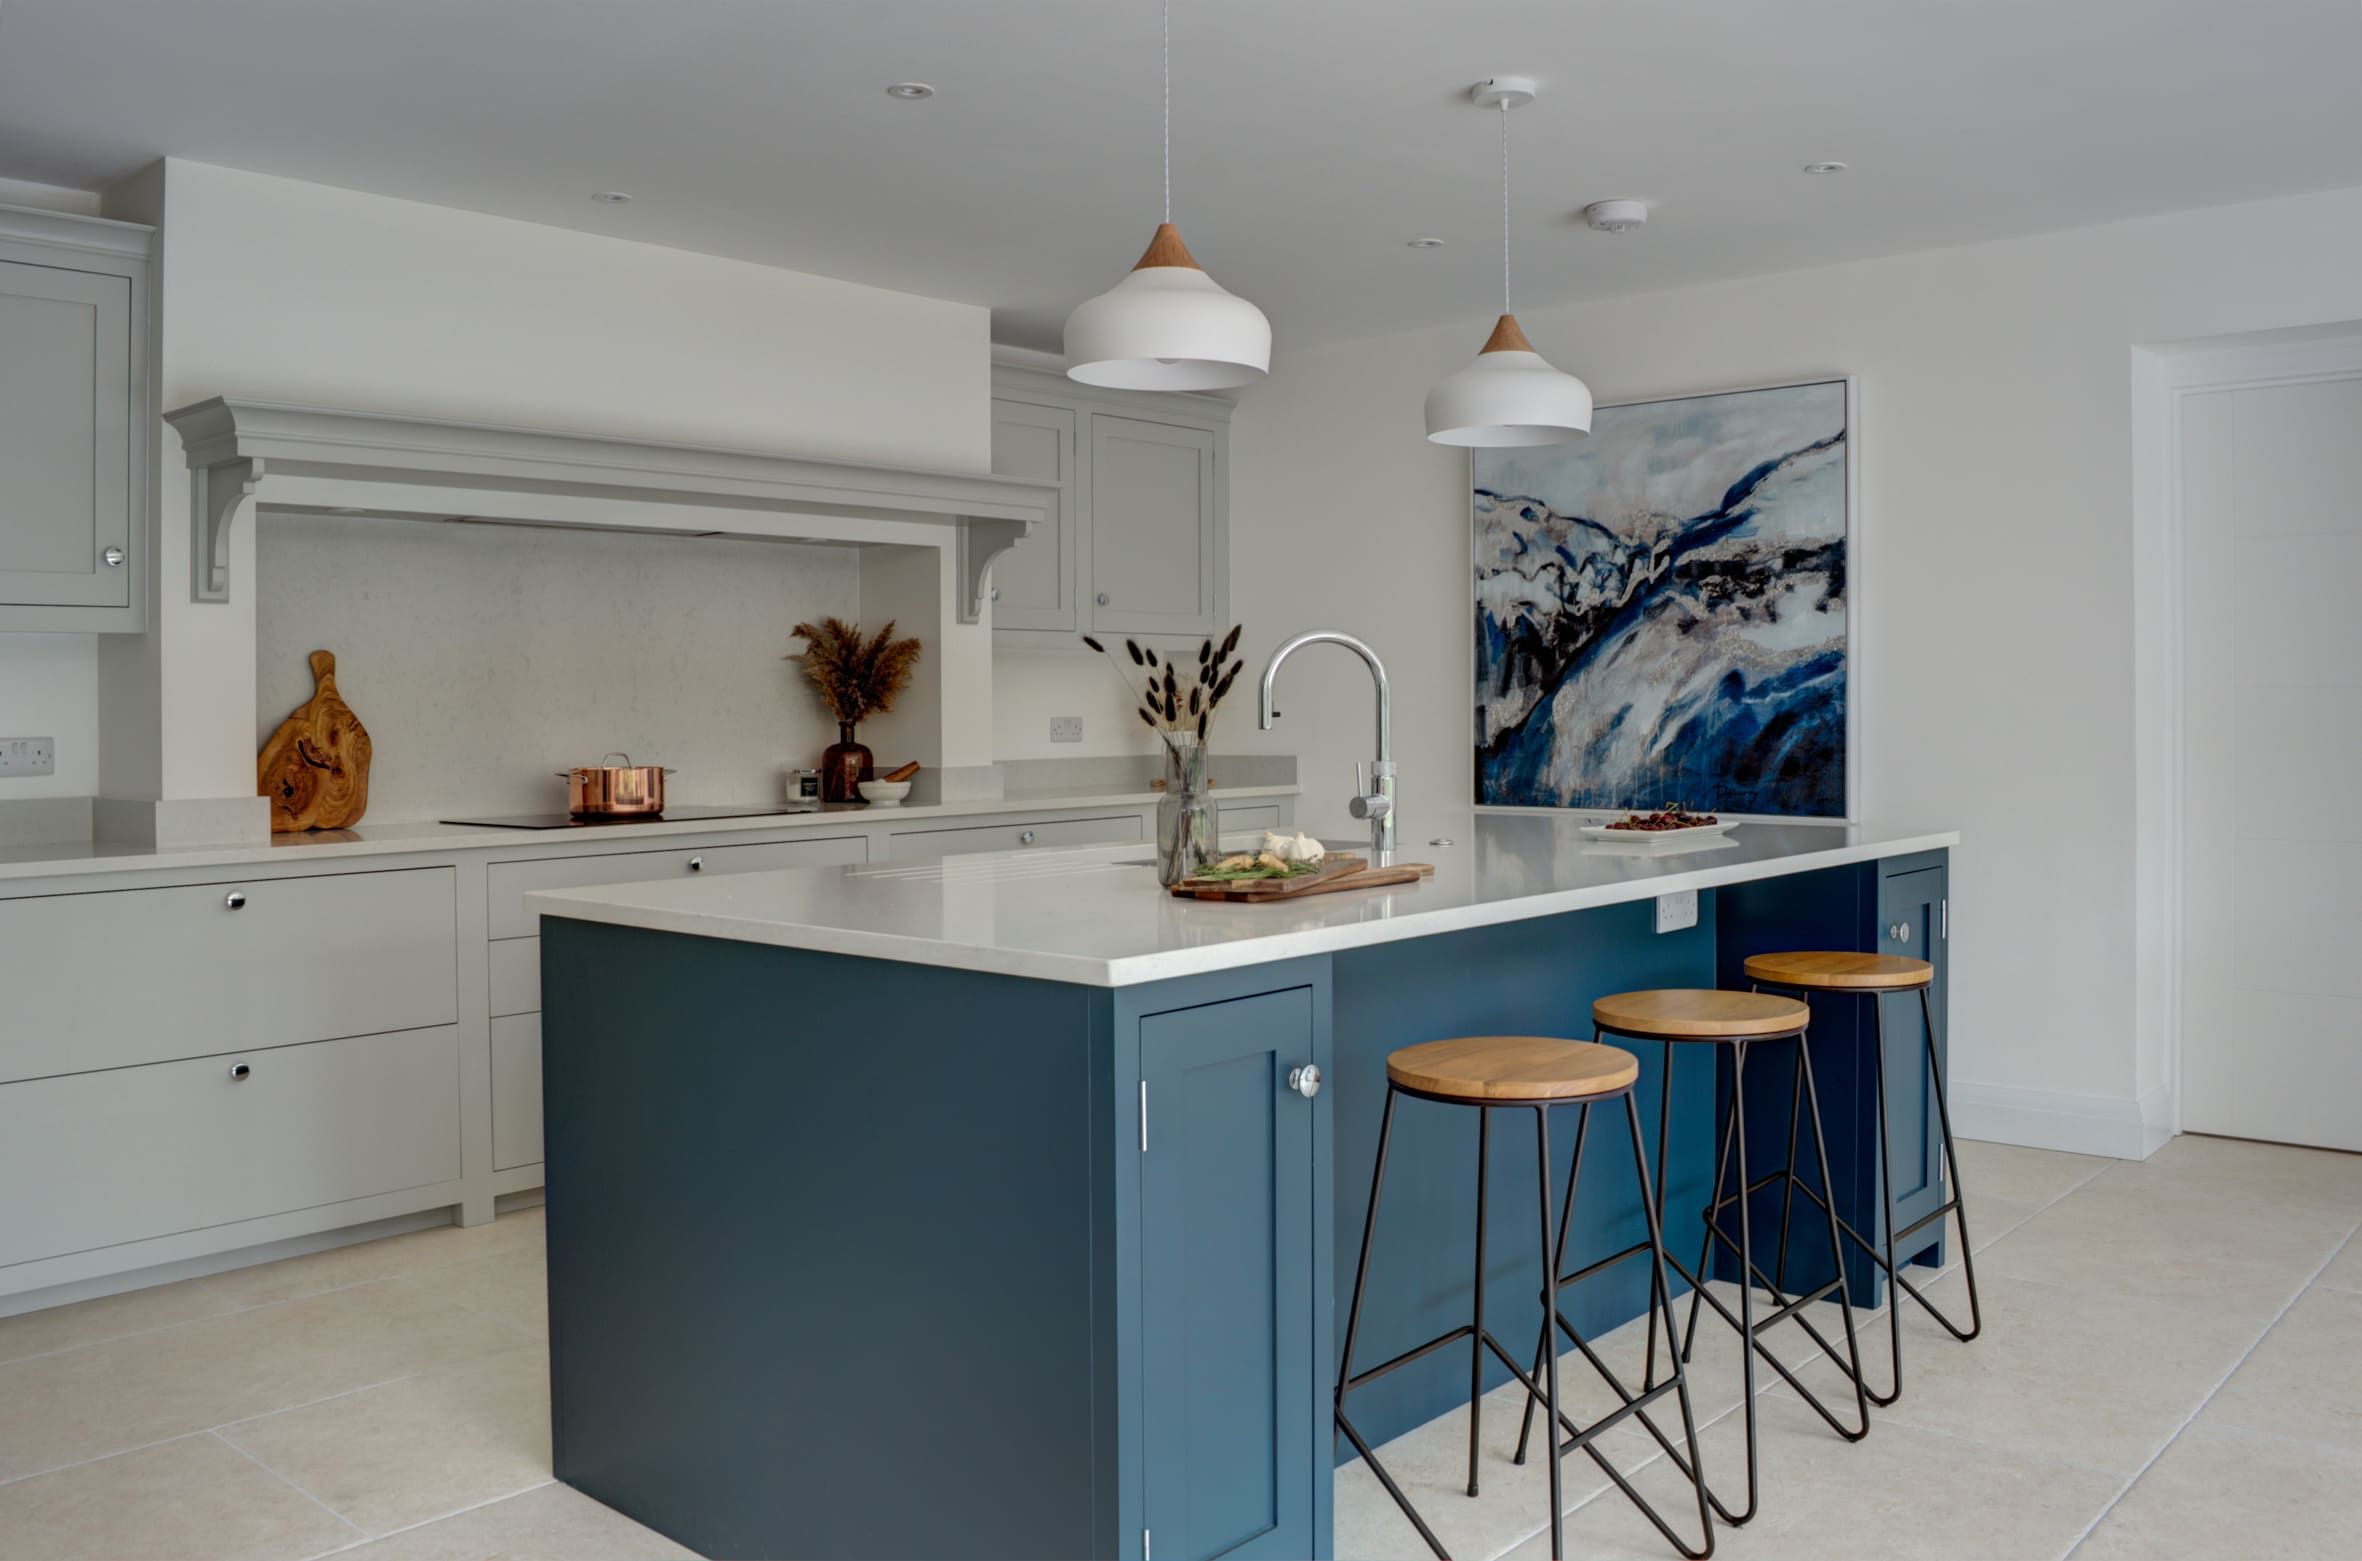 A contemporary bespoke kitchen with a two-tone design, featuring white cabinets, a teal island with a white countertop, wooden bar stools, pendant lighting, and decorative art on the wall, set on a light tiled floor.